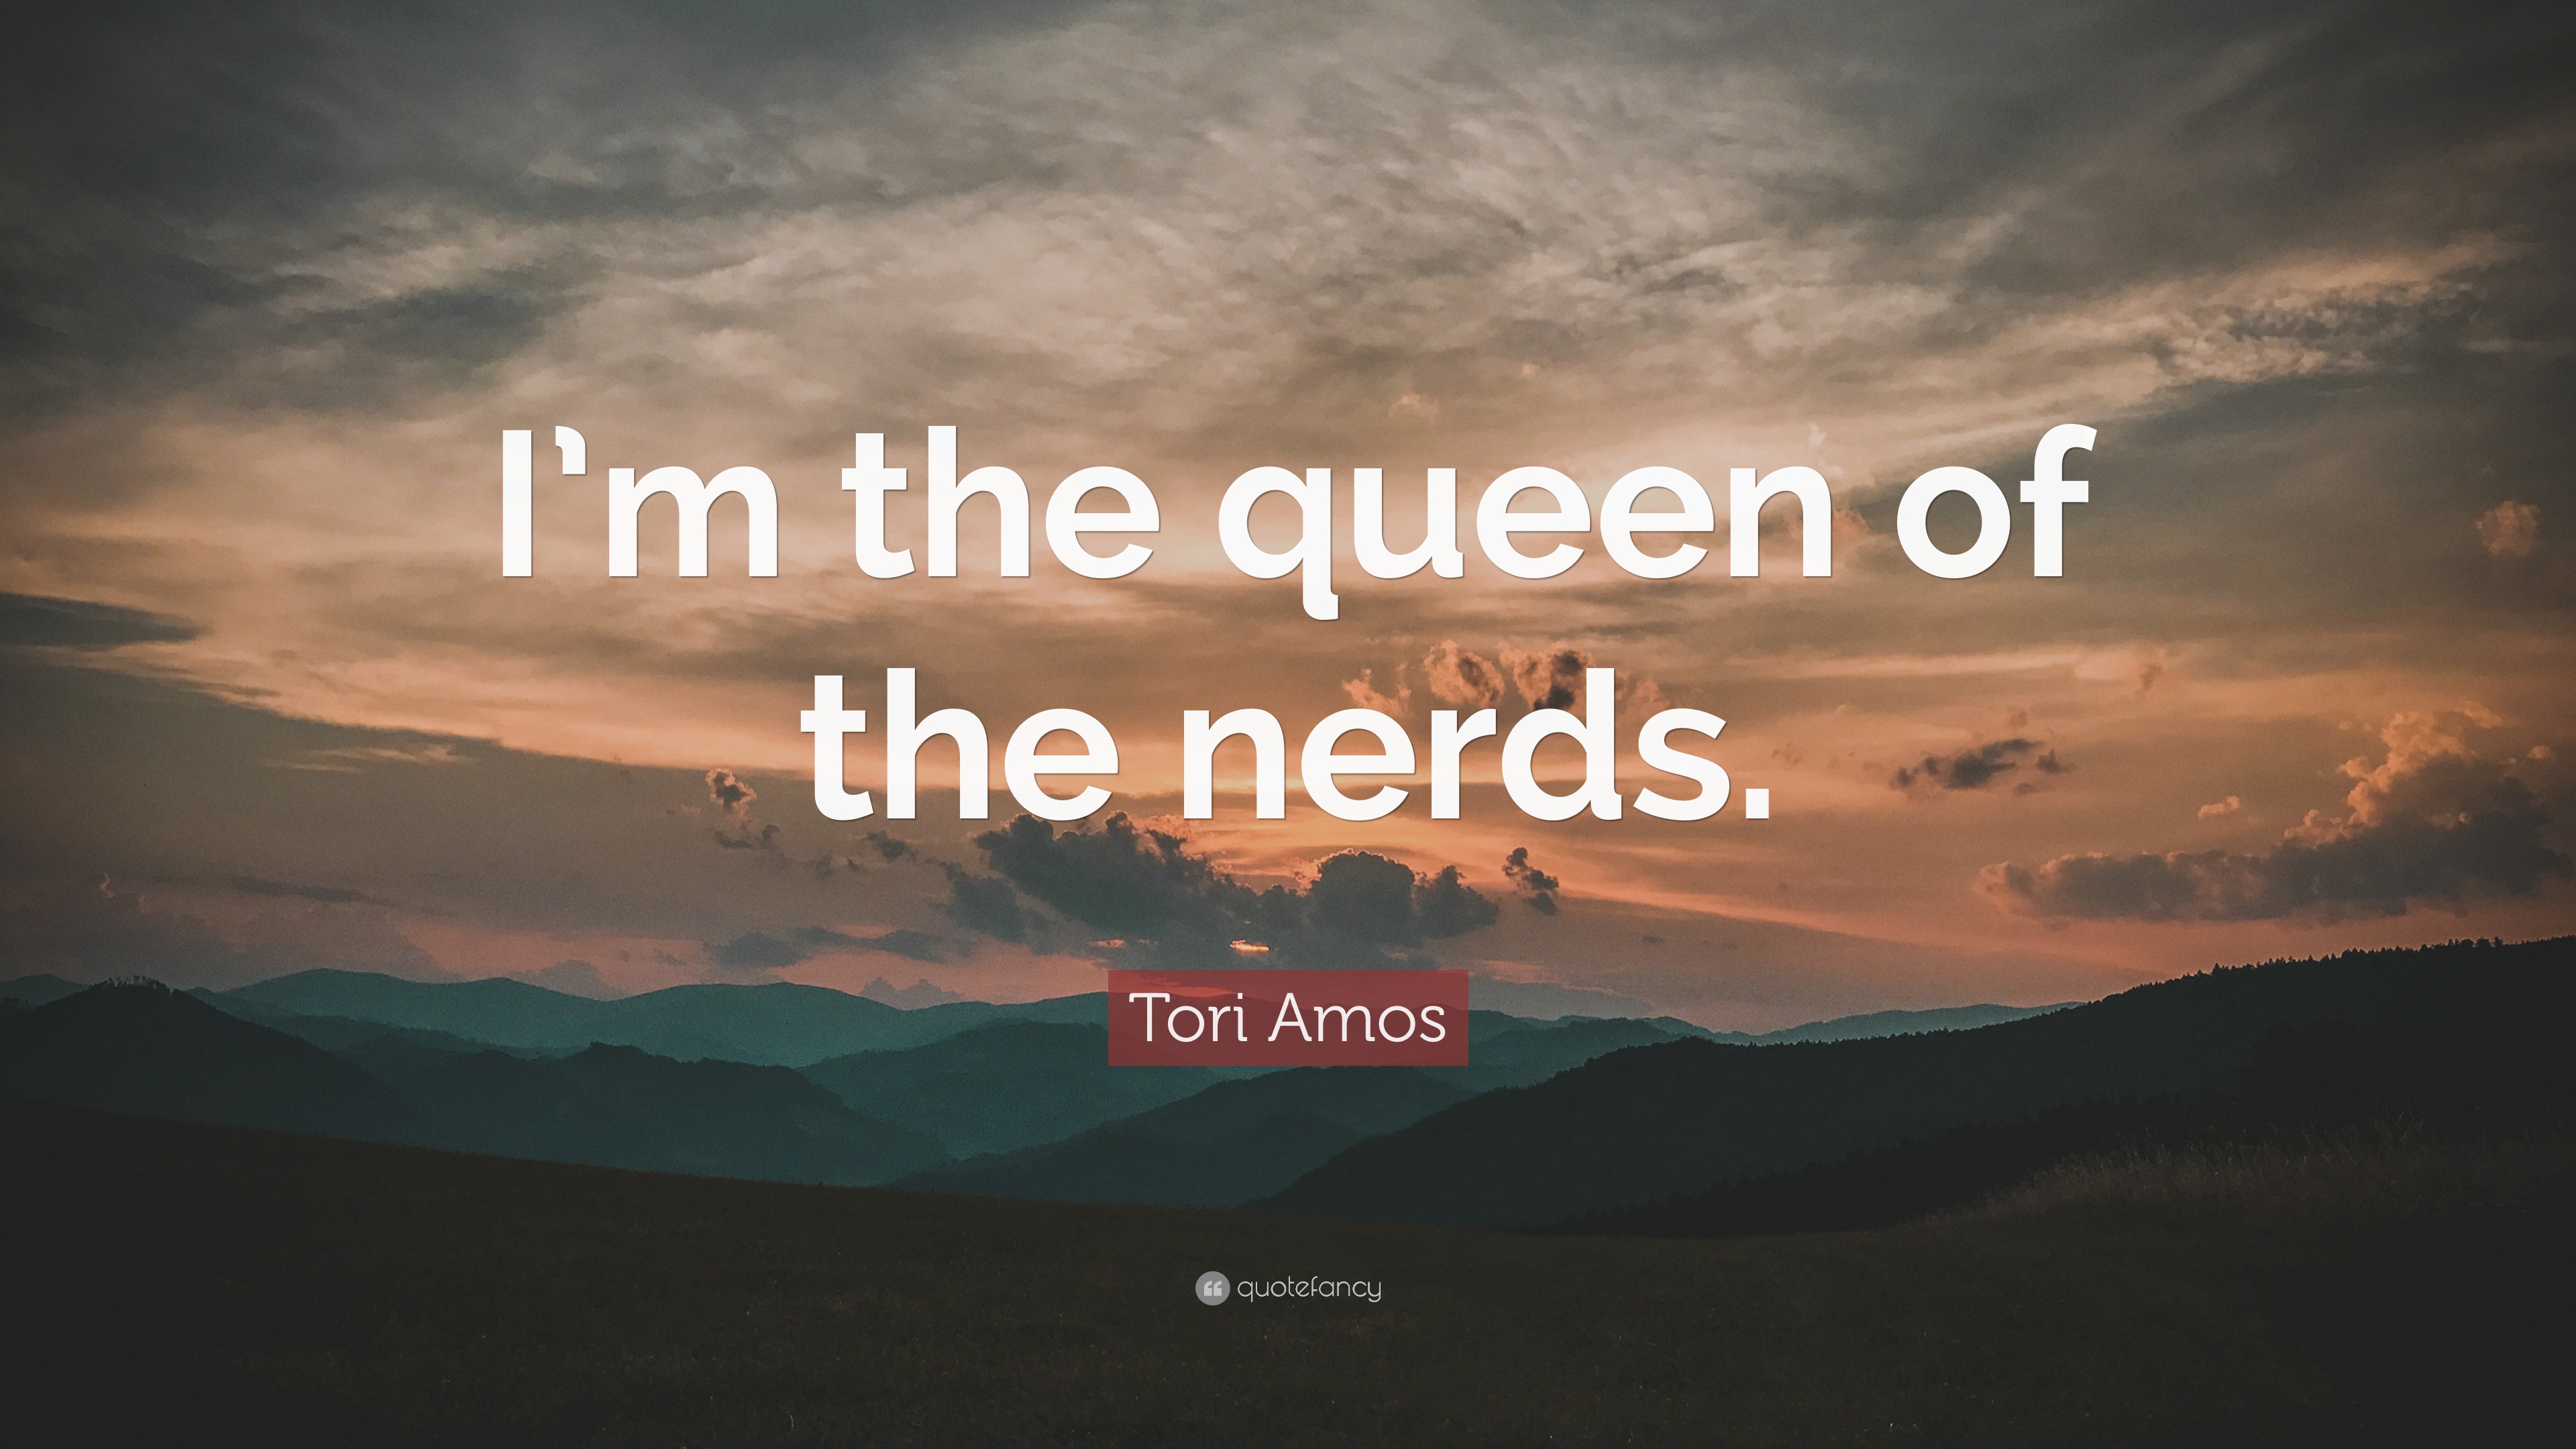 Tori Amos Quote: “I'm the queen of the